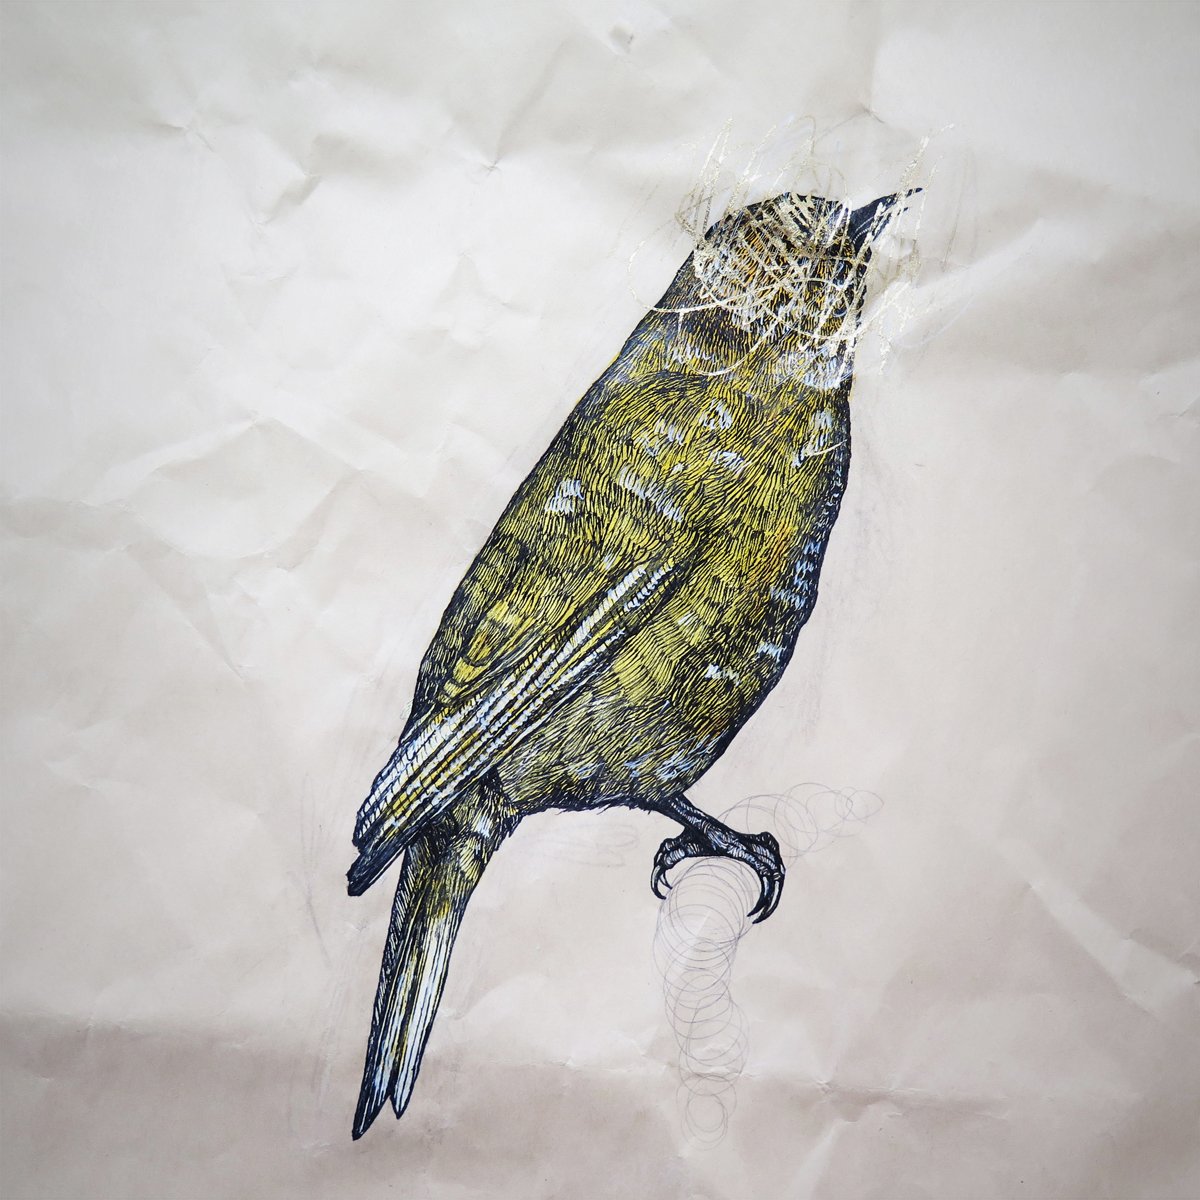  pen &amp; ink with gouache, gold leaf  from “Egress” solo exhibit at Stand4 Gallery 